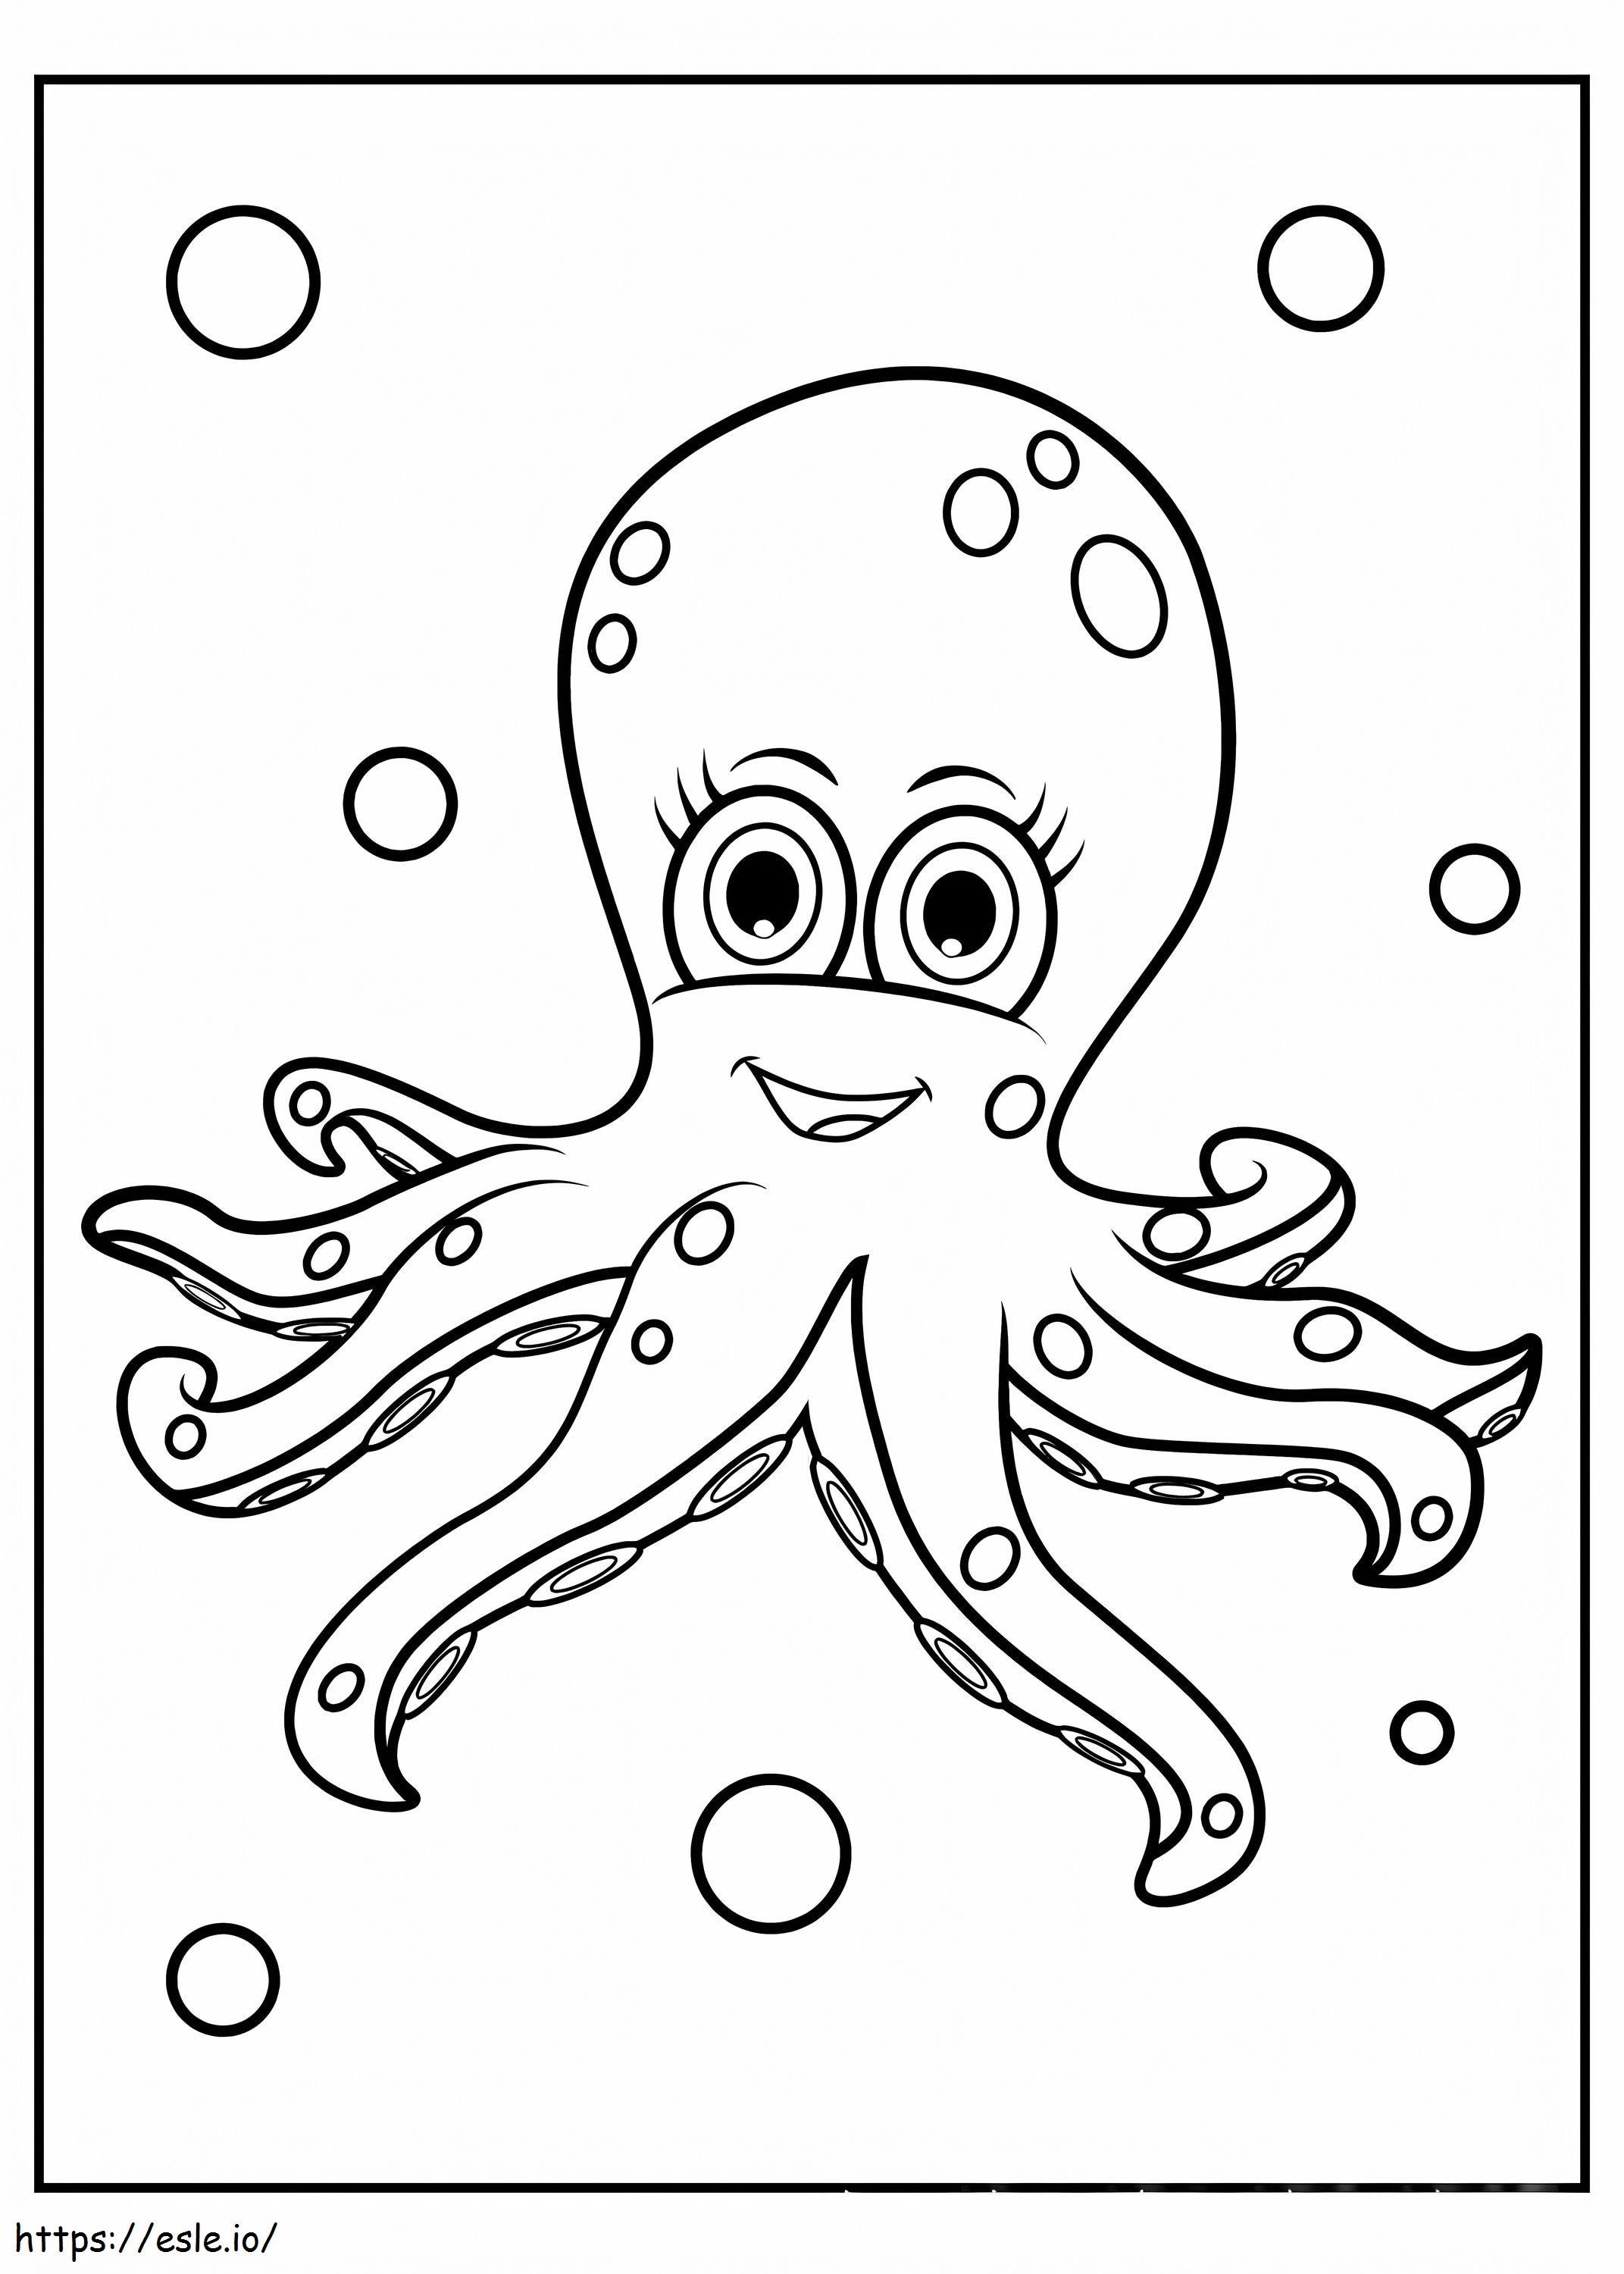 Funny Fluffy Octopus coloring page